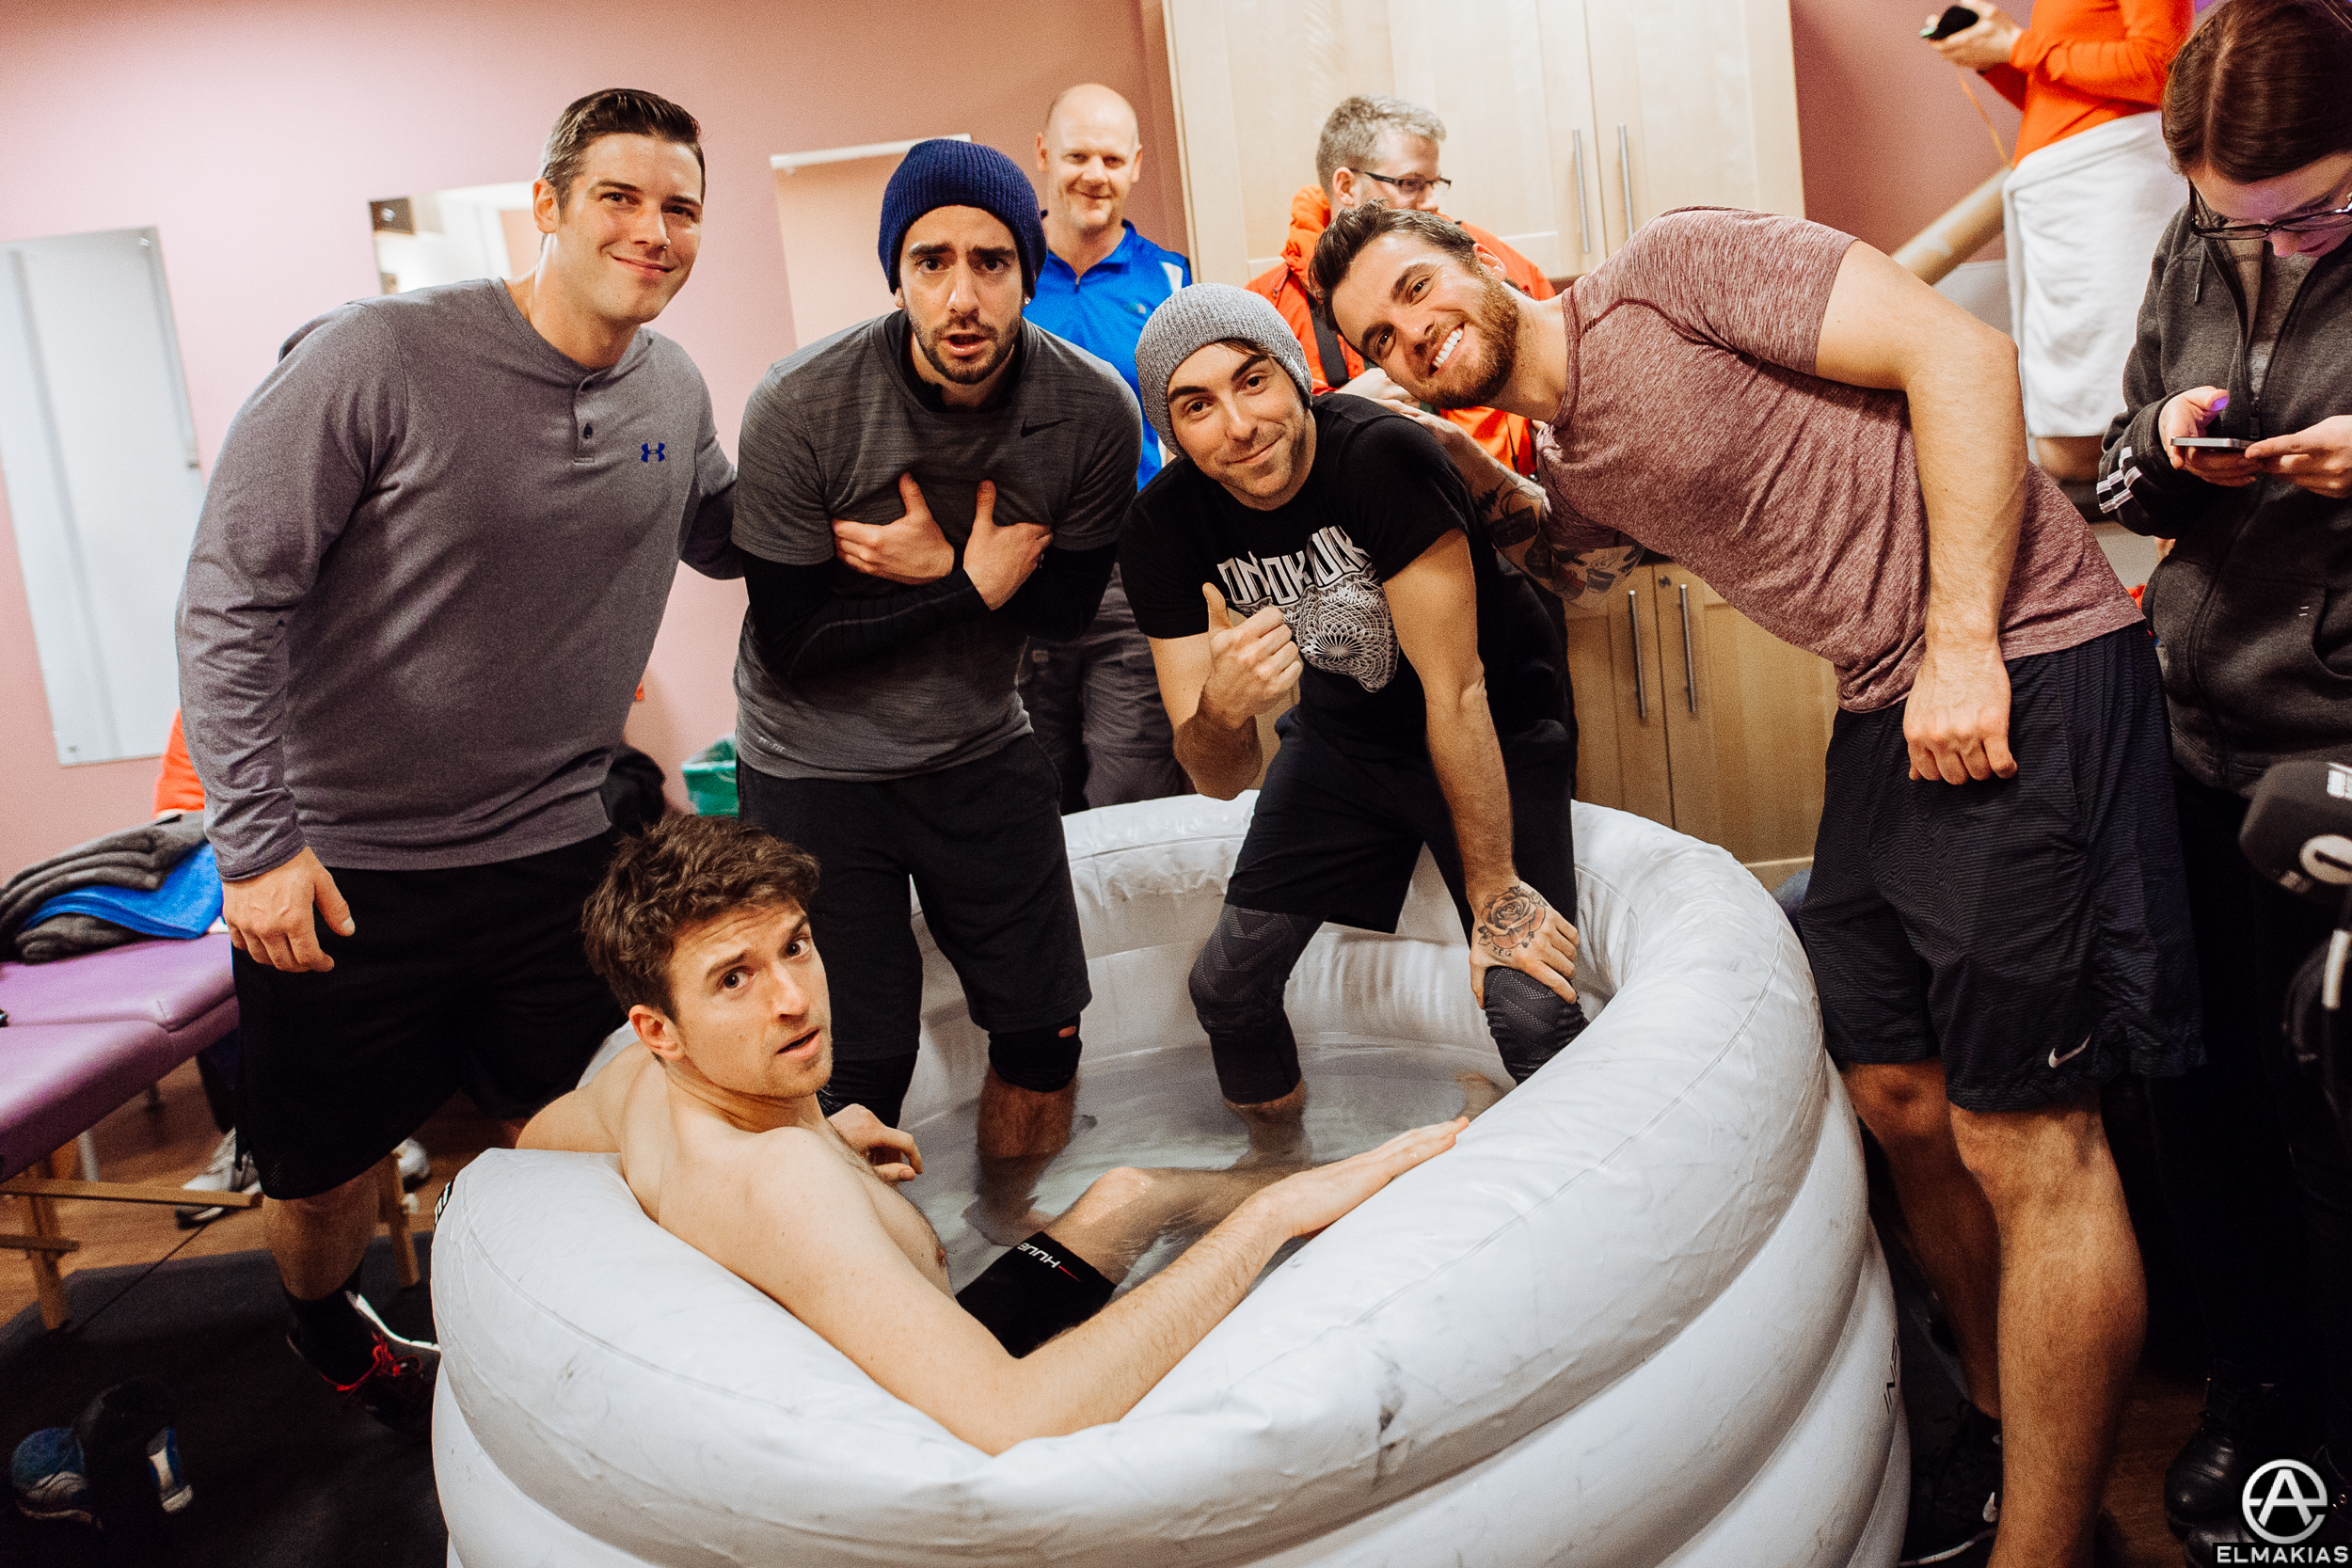 All Time Low and Greg James by Adam Elmakias - All Time Low UK Arena Tour